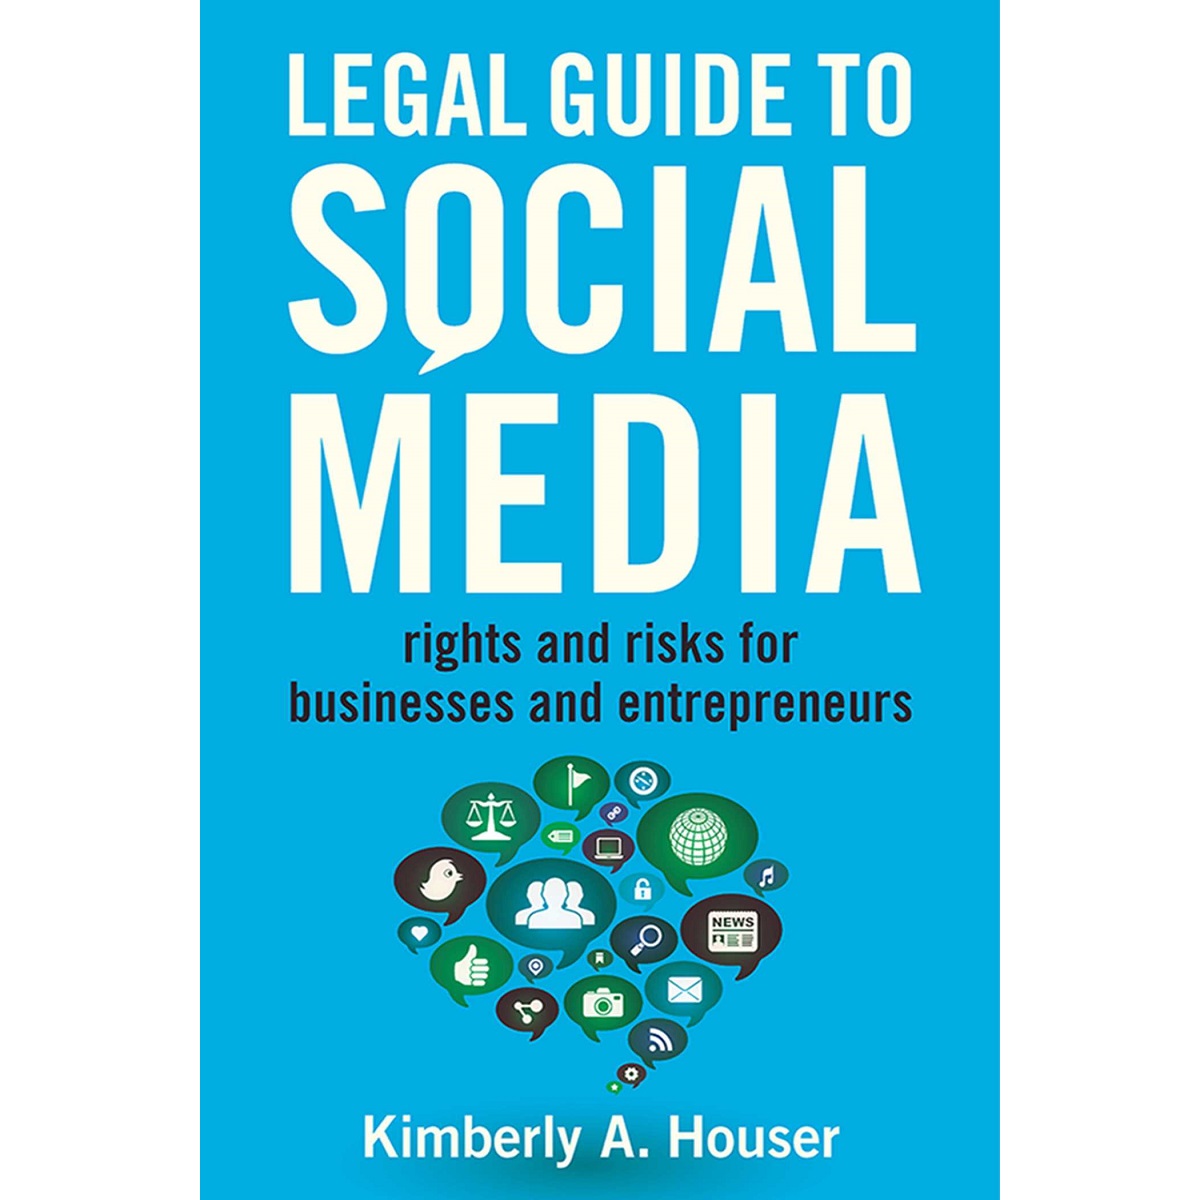 Legal Guide to Social Media By Kimberly A. Houser